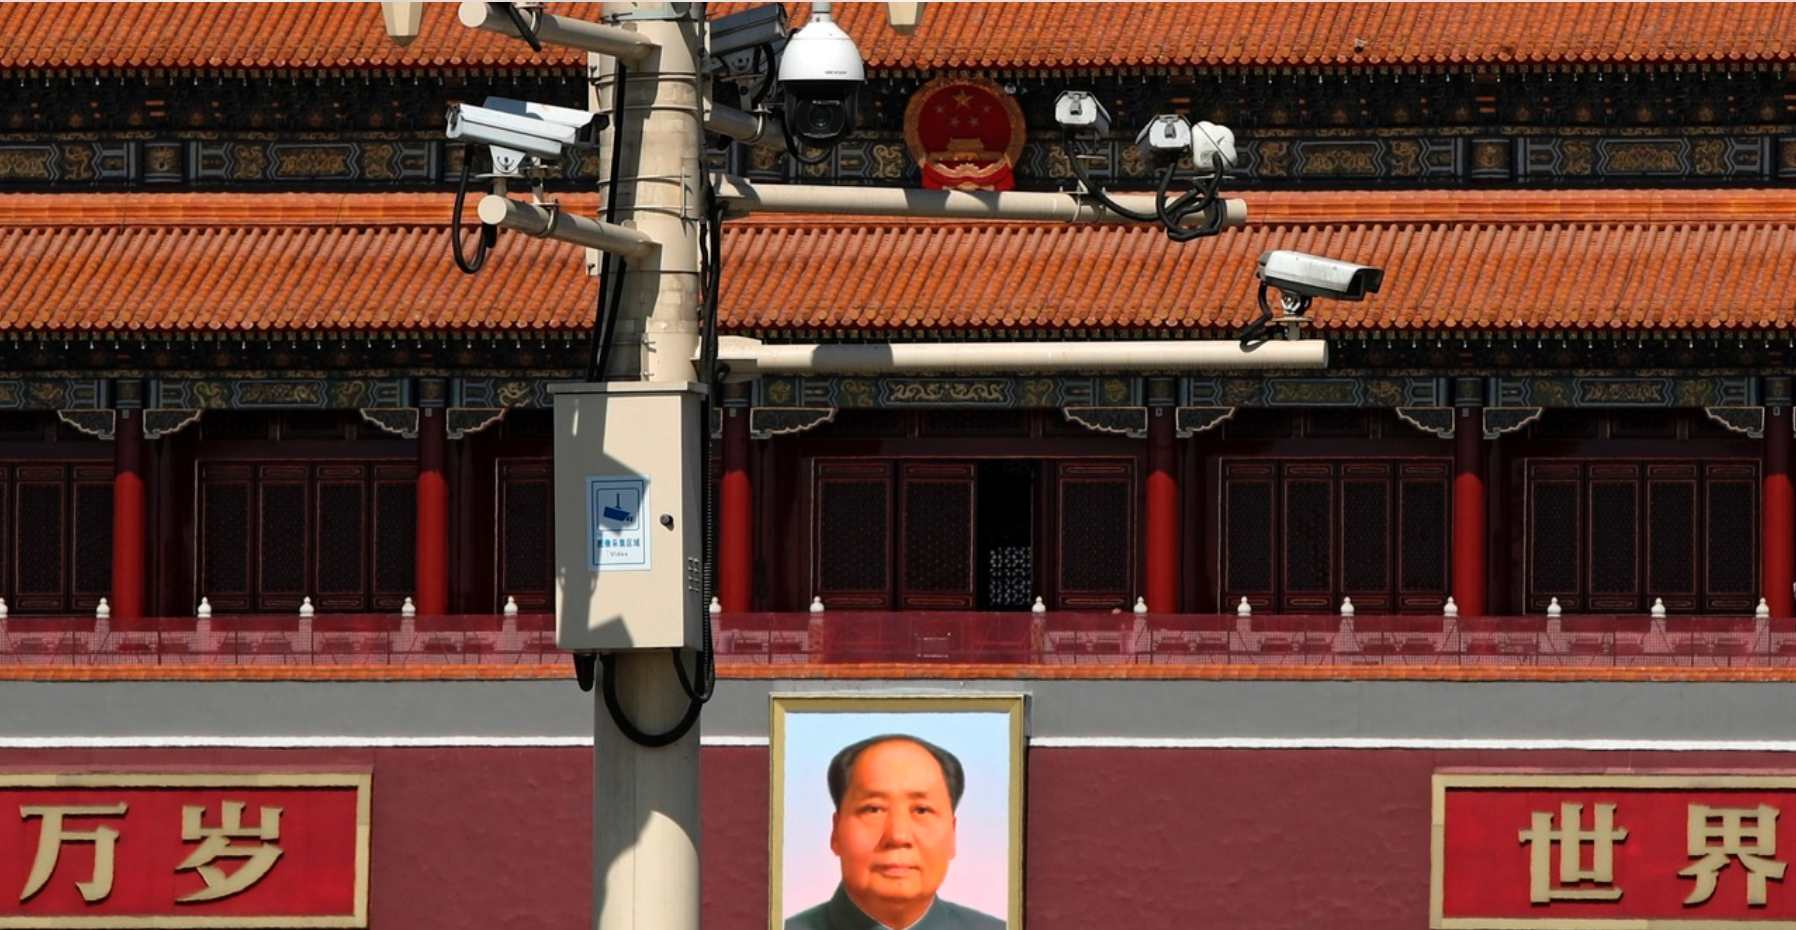 Beijing is ‘extending’ Uighur model of surveillance to the rest of China